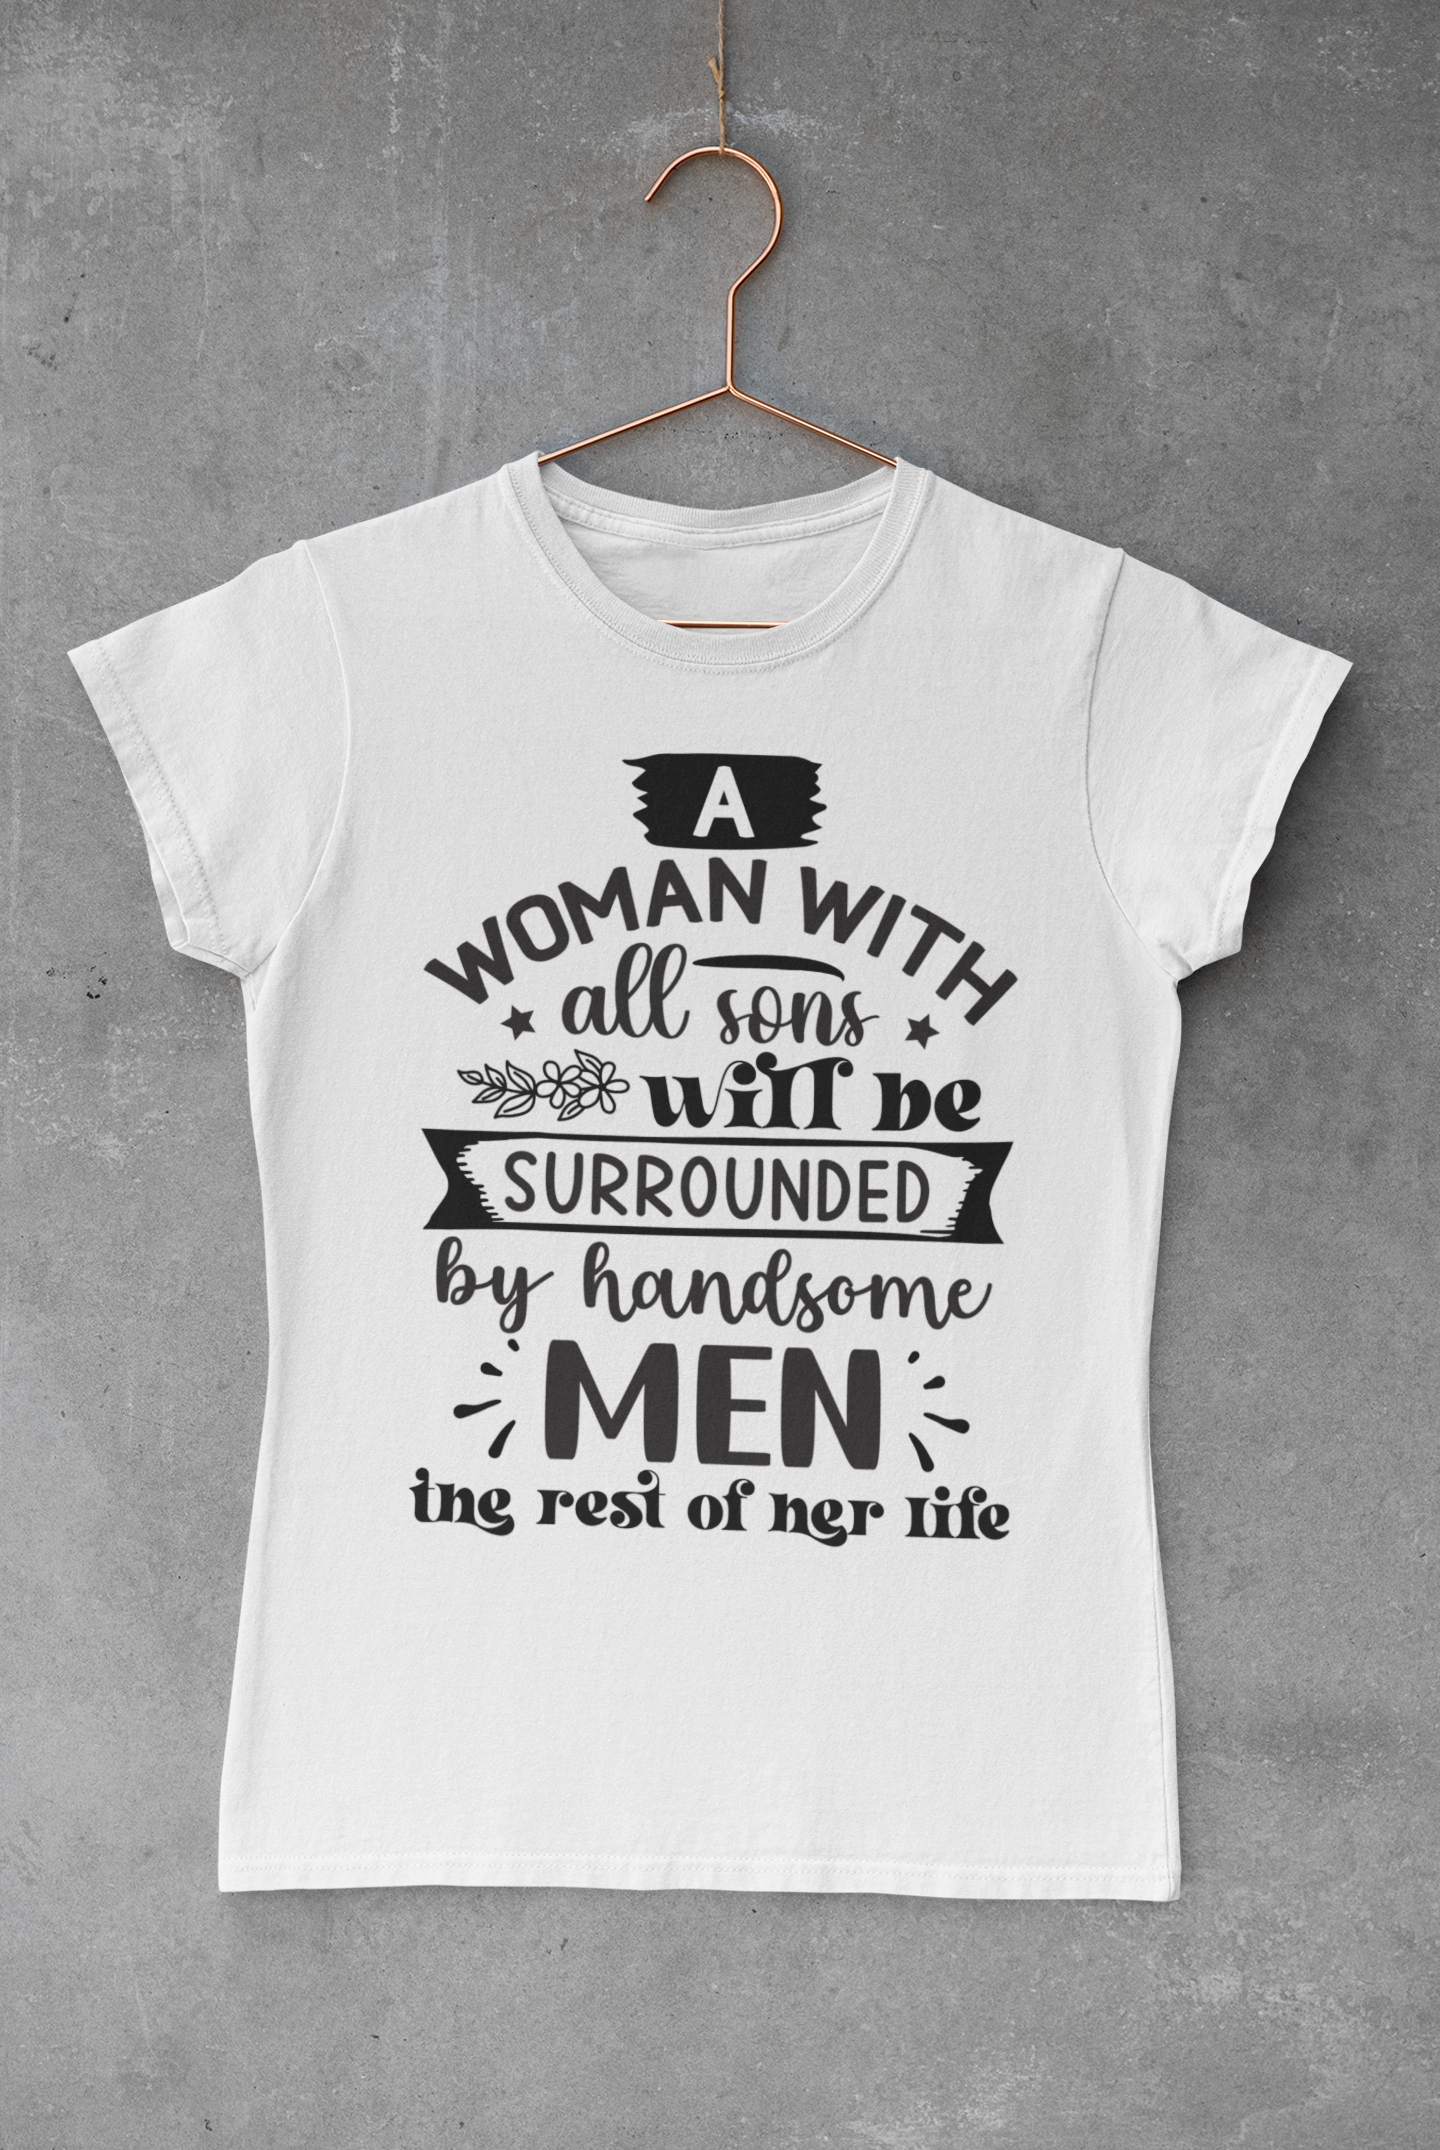 All Woman With All Sons T-shirt